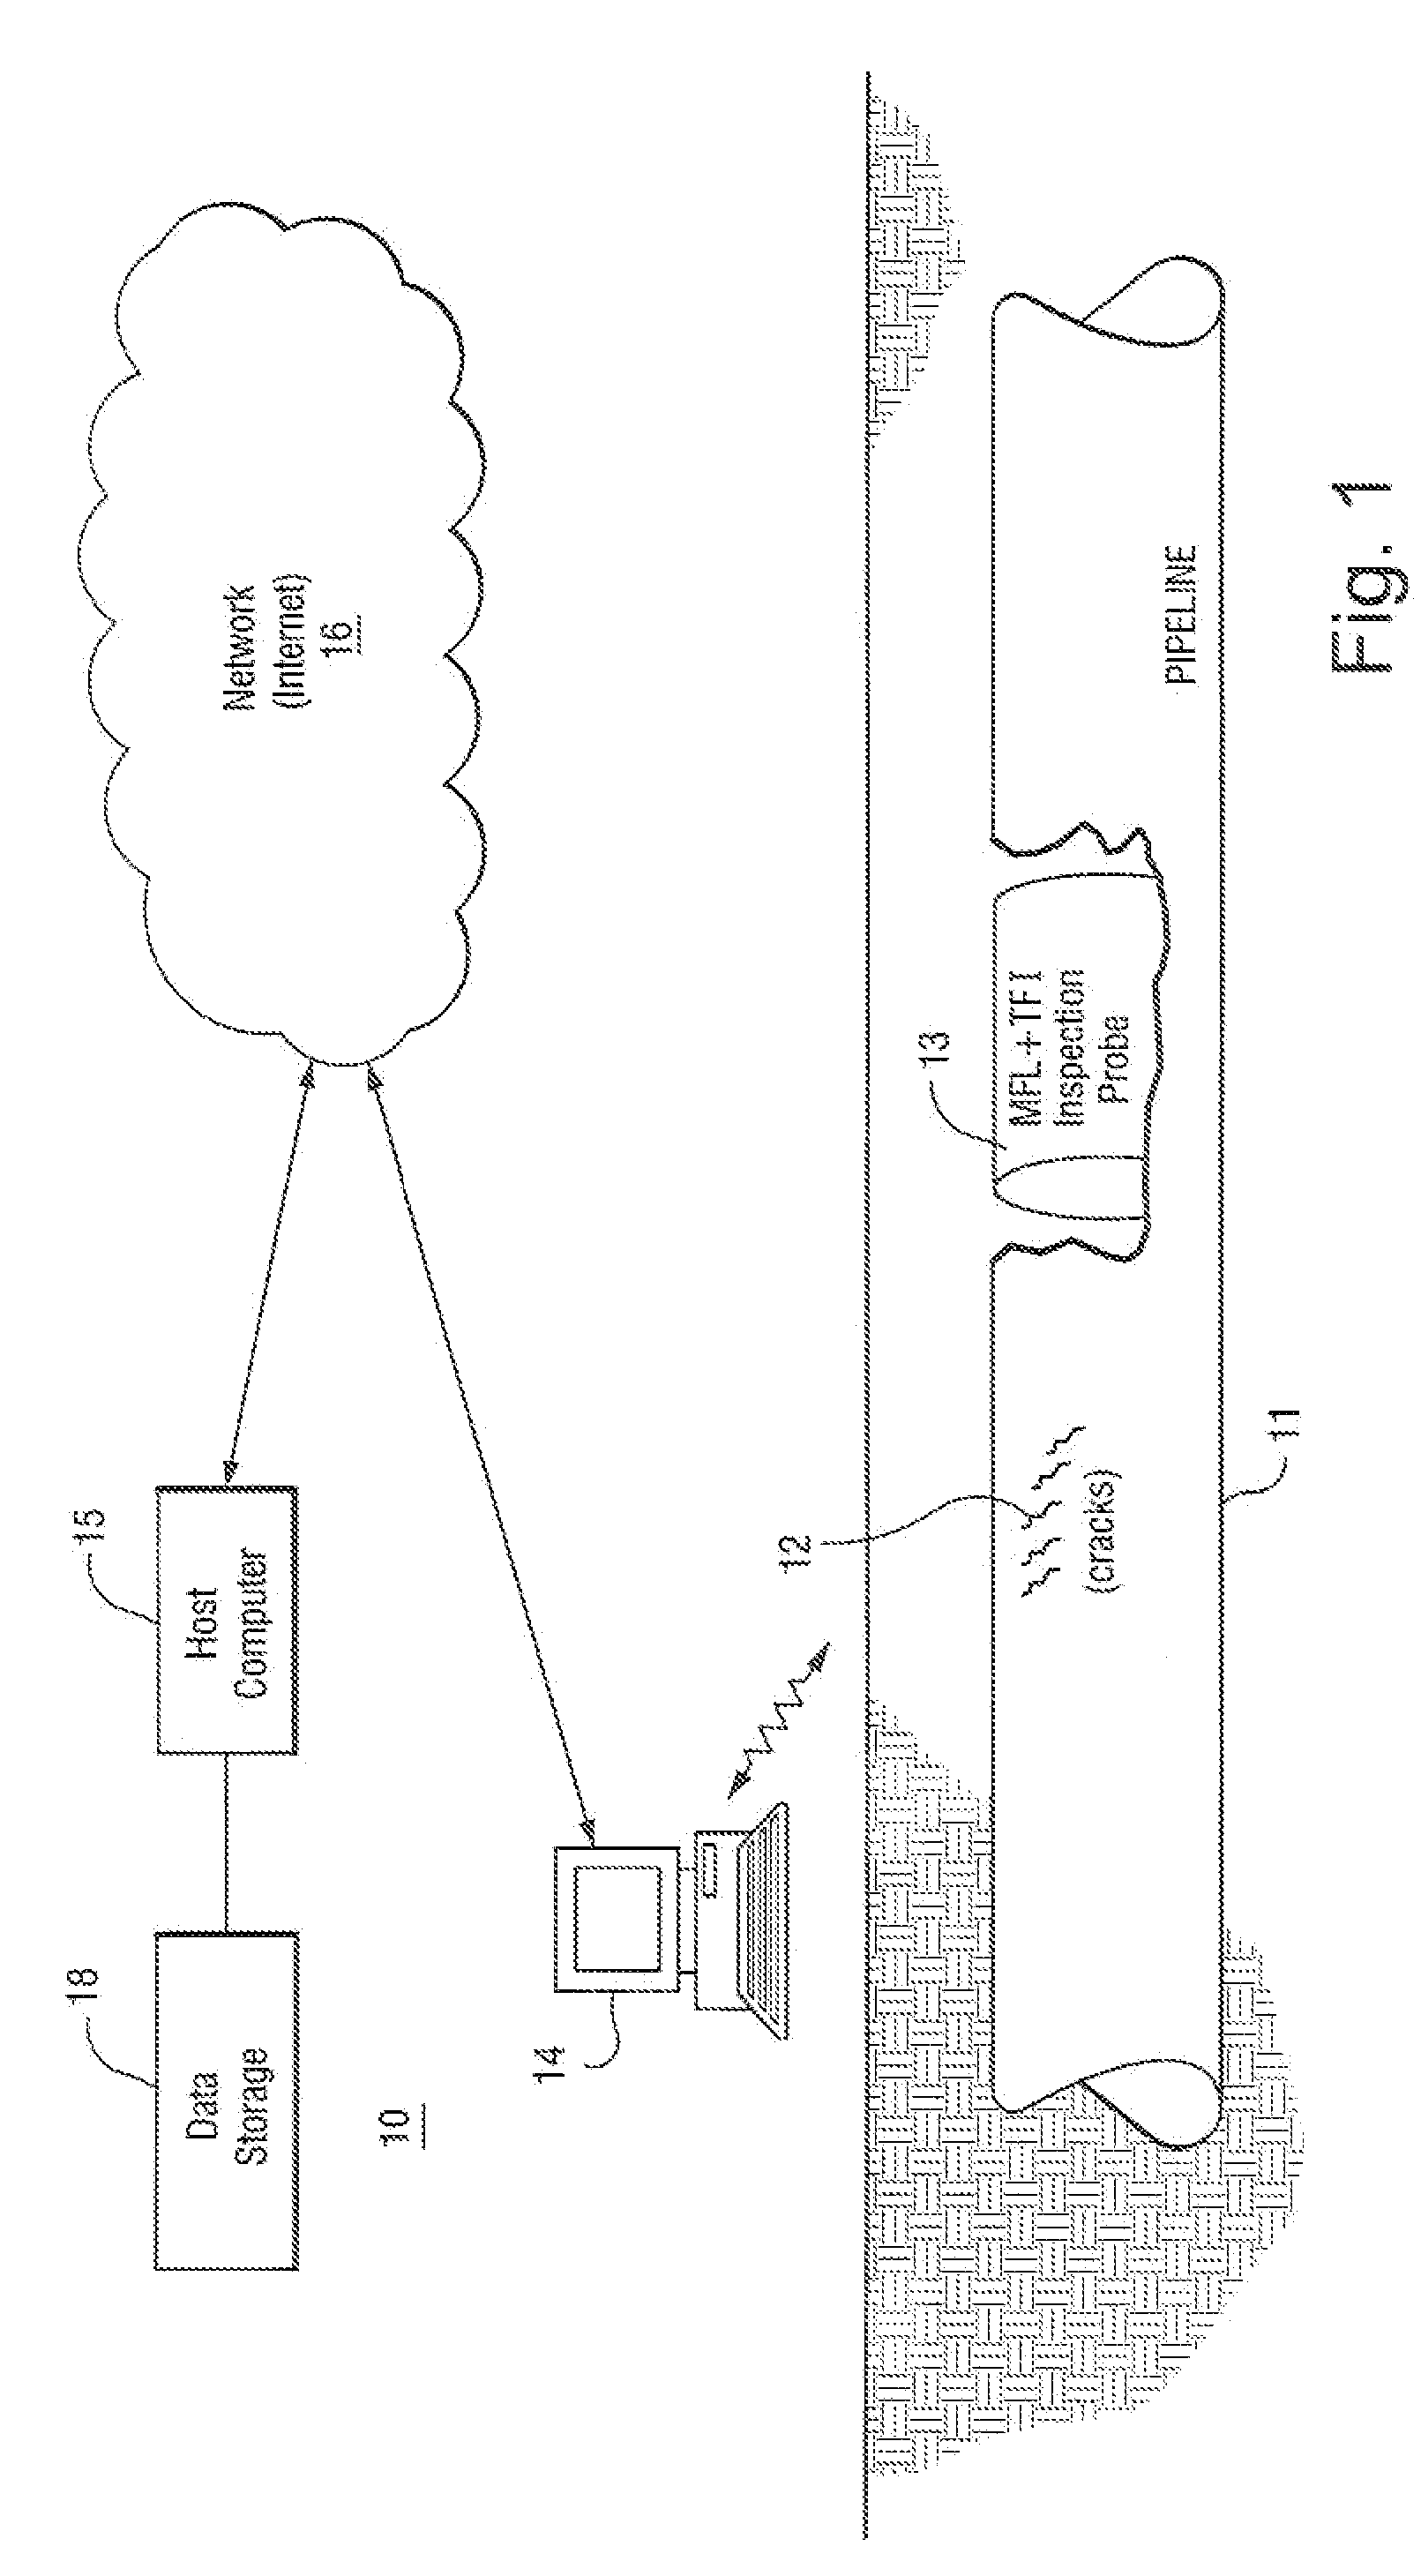 Method and apparatus inspecting pipelines using magnetic flux sensors